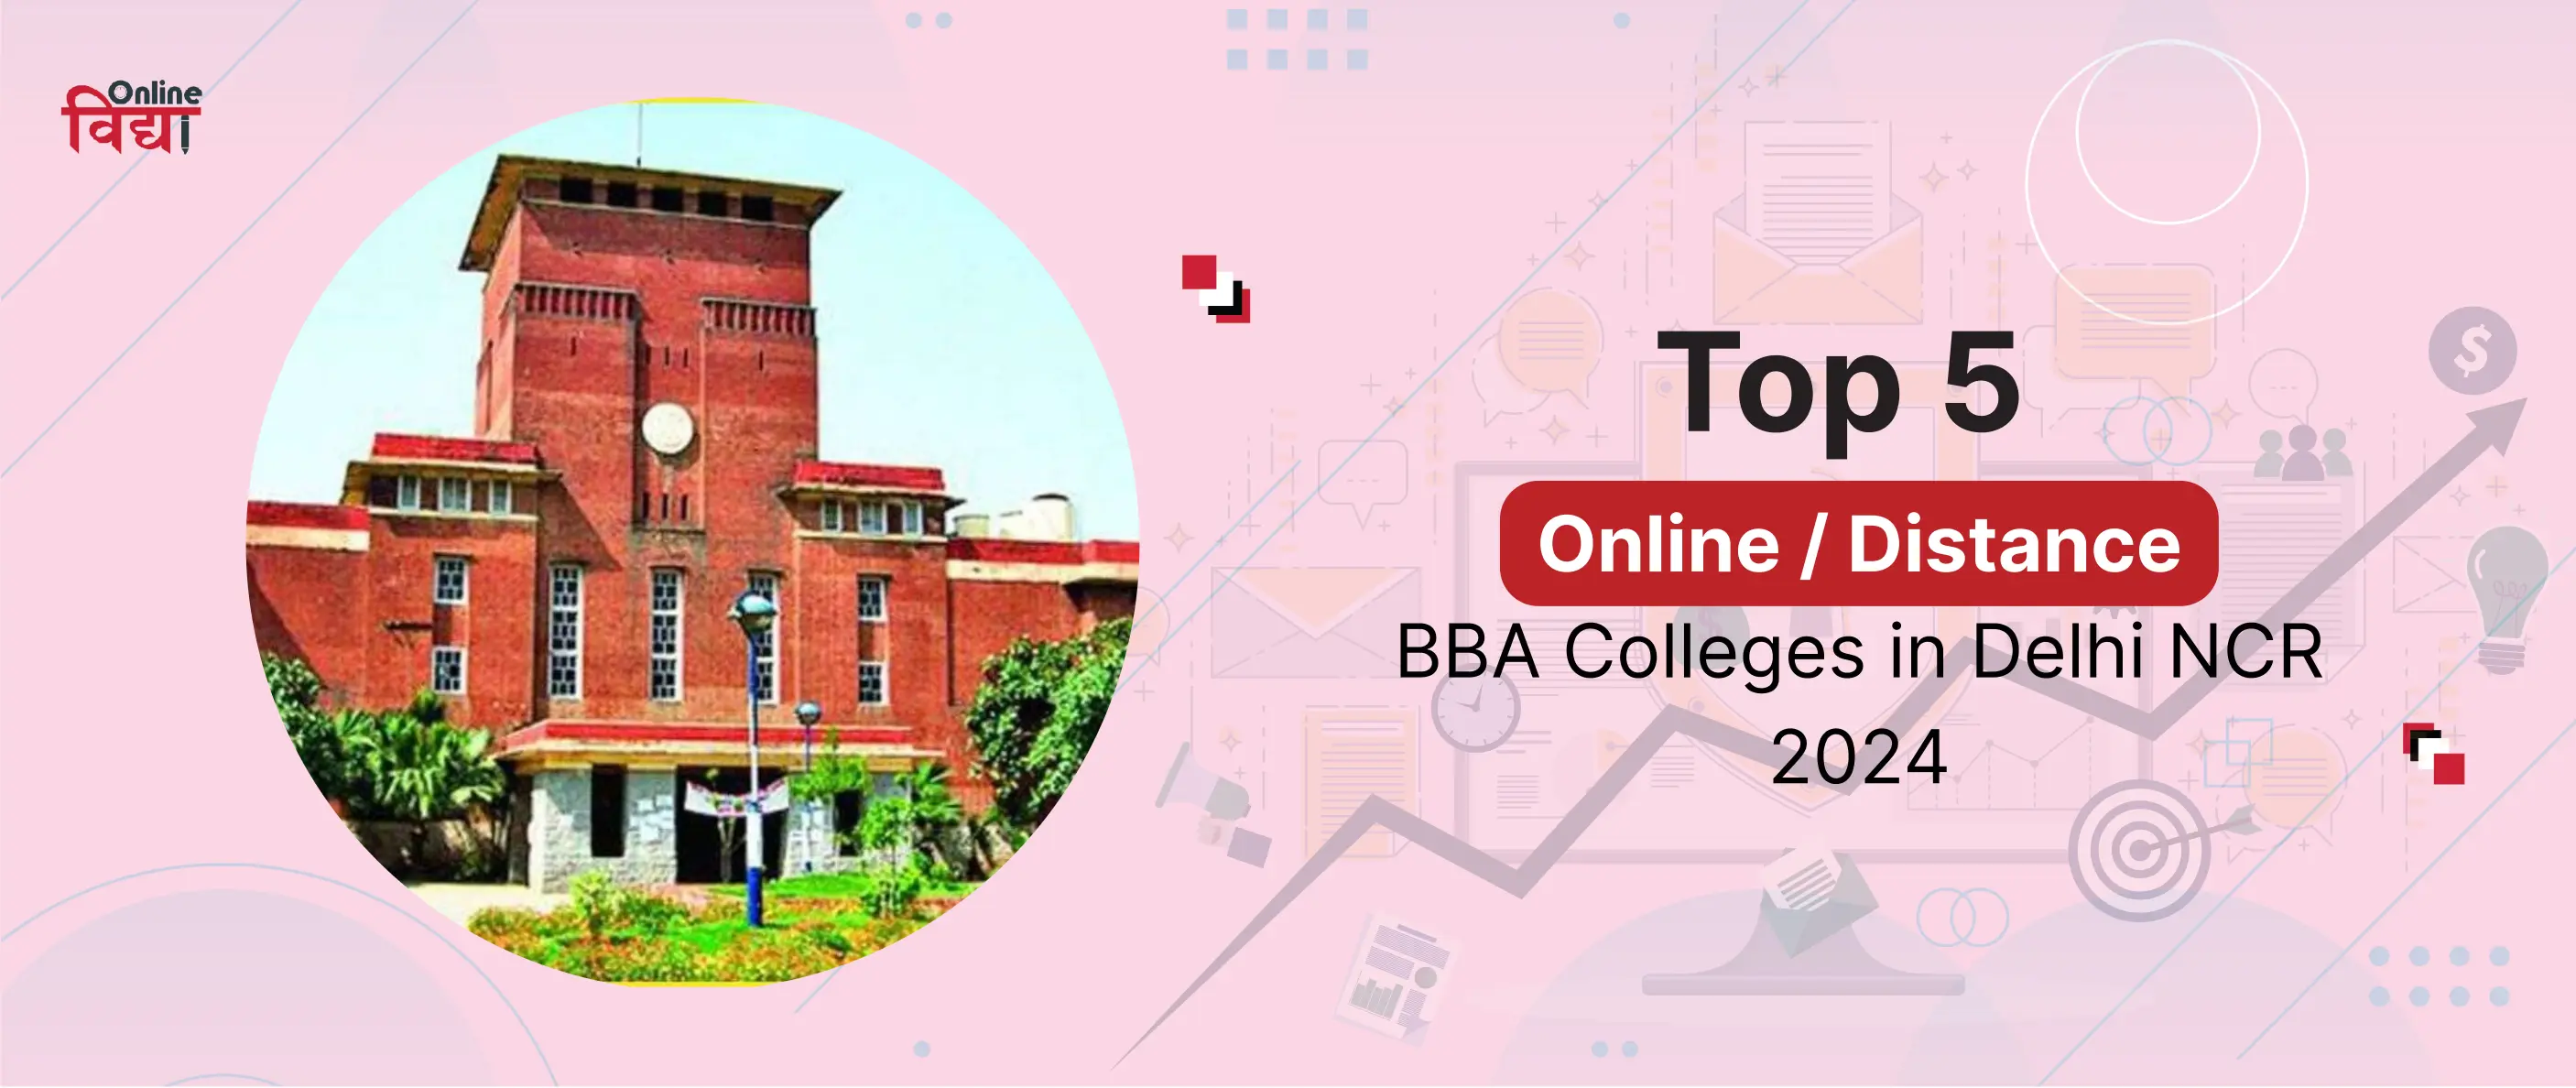 Top 5 Online/ Distance BBA Colleges in Delhi NCR 2024